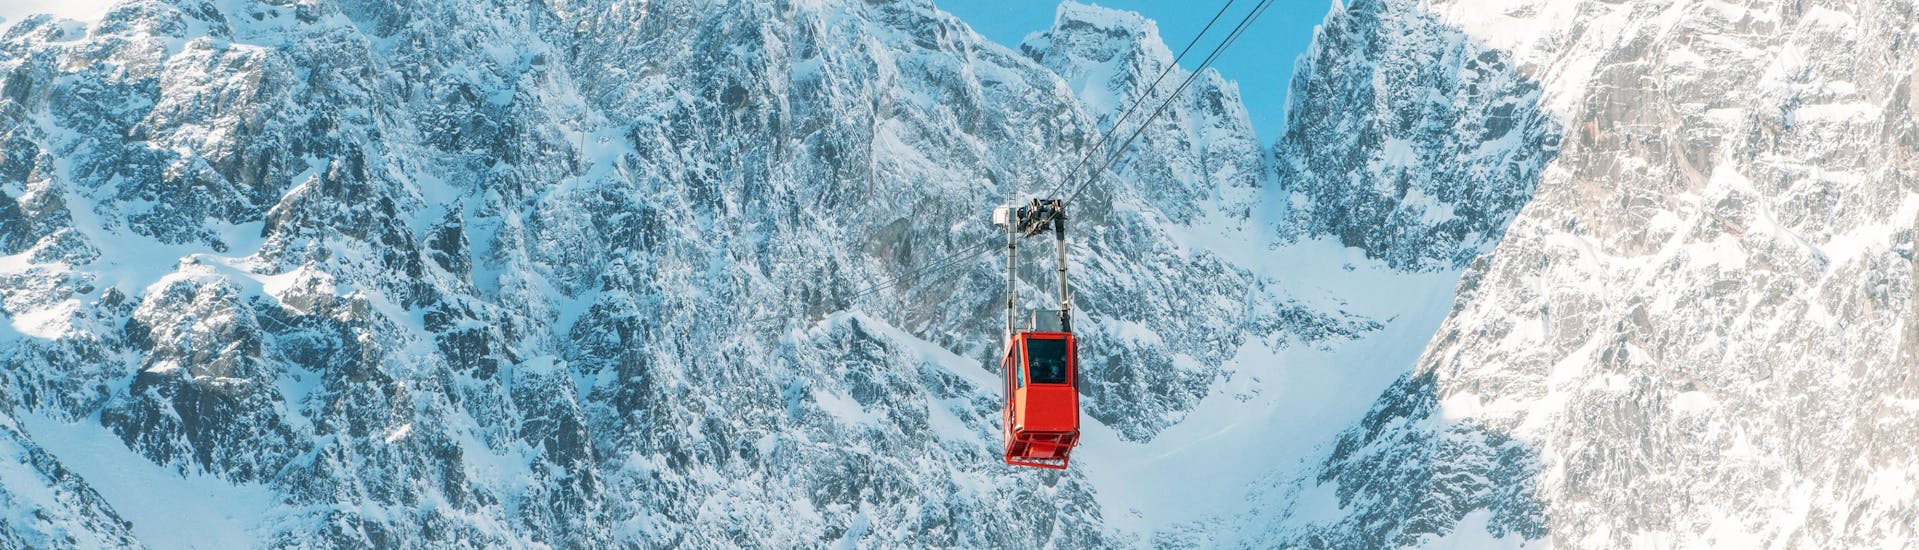 A red gondola going up to a peak in the ski resort Tatranská Lomnica in Slovakia, where local ski schools offer their ski lessons.